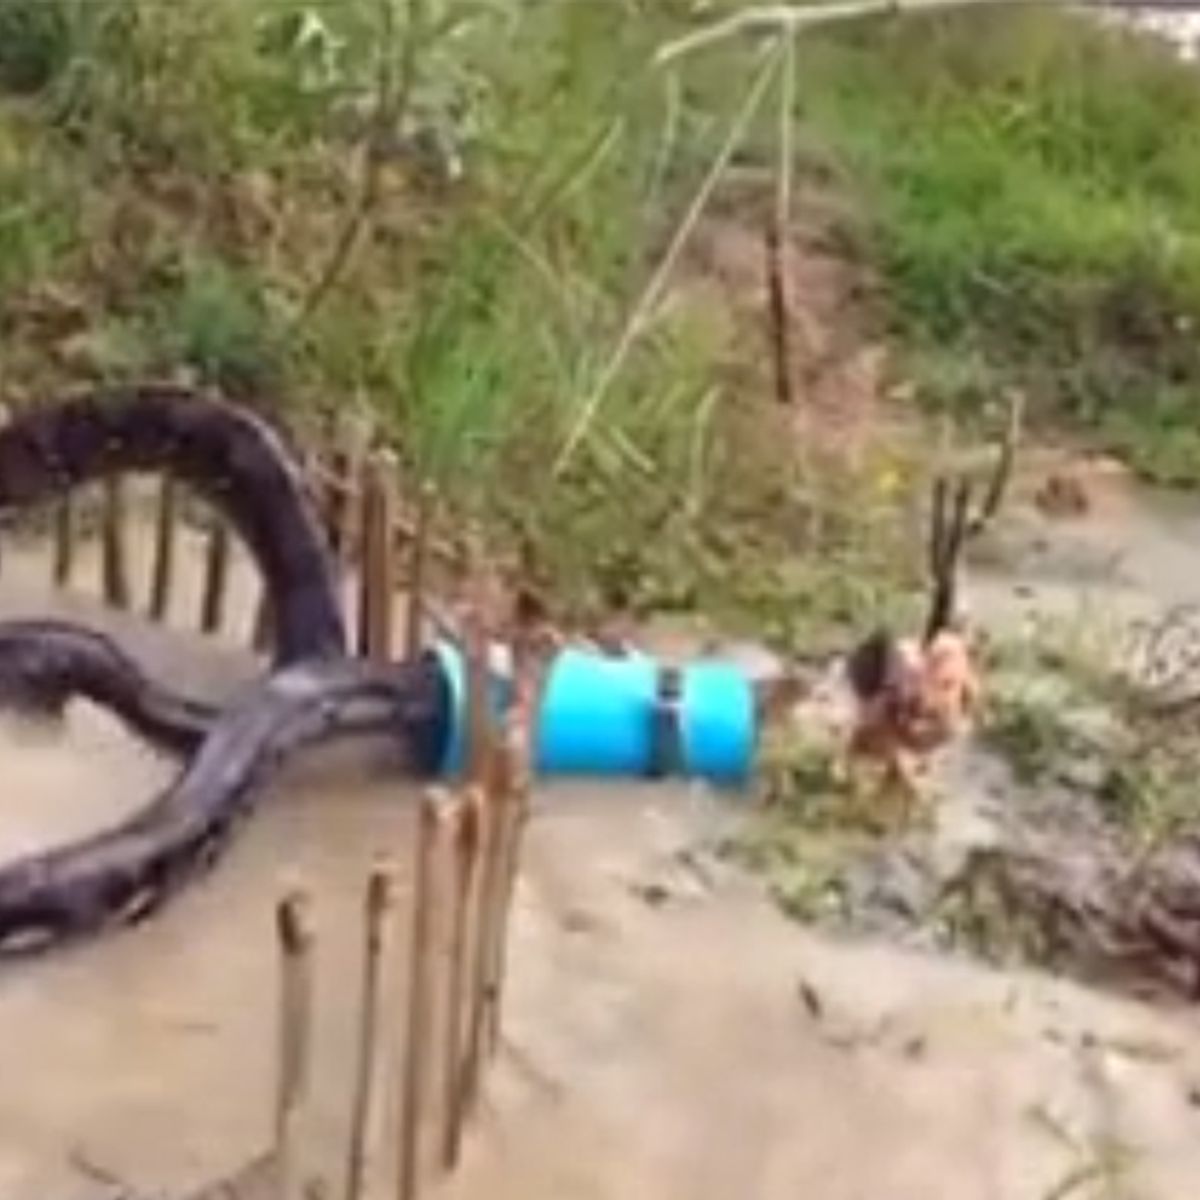 Does This Video Show a Giant Anaconda Getting Caught in a Trap? 